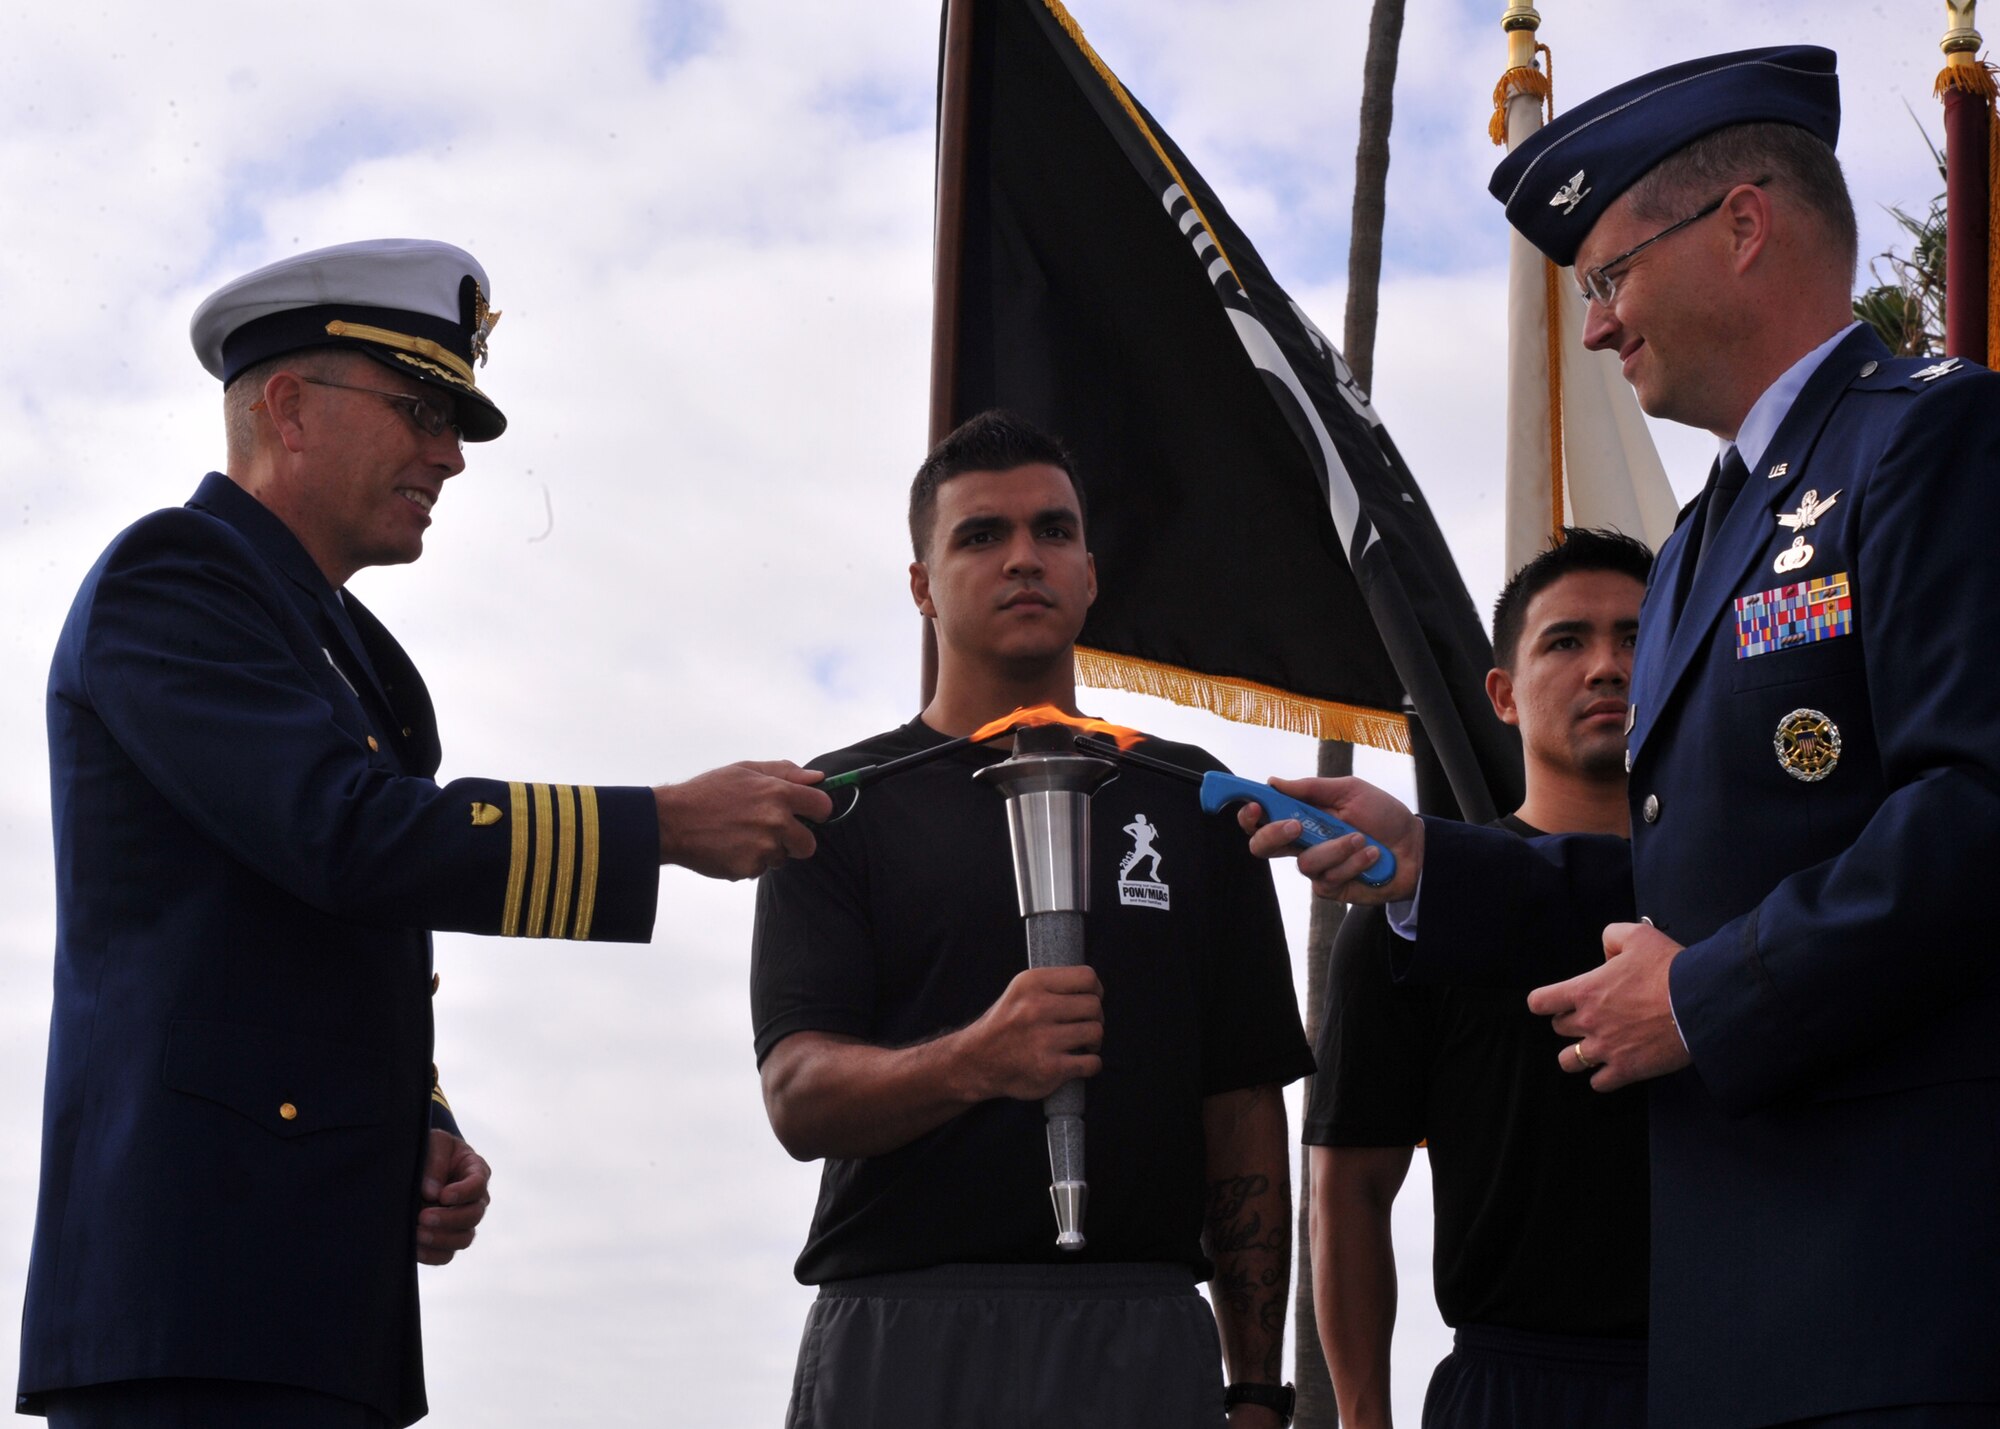 U.S. Coast Guard Capt. James Jenkins, sector commander and captain of the Port for U.S. Coast Guard Sector Los Angeles – Long Beach, far left, and U.S. Air Force Col. Steven Whitney, Senior Material leader, GPS User Equipment Division at Space and Missile Systems Center, far right, light the torch at the POW/MIA 24-Hour Relay opening ceremony, Sept. 18. The sixth annual event sponsored by the Los Angeles Air Force Base Company Grade Officers Council began at Terminal Island Coast Guard Base in San Pedro and concludes 54 miles later at Los Angeles AFB in El Segundo. (Photo by Sarah Corrice)